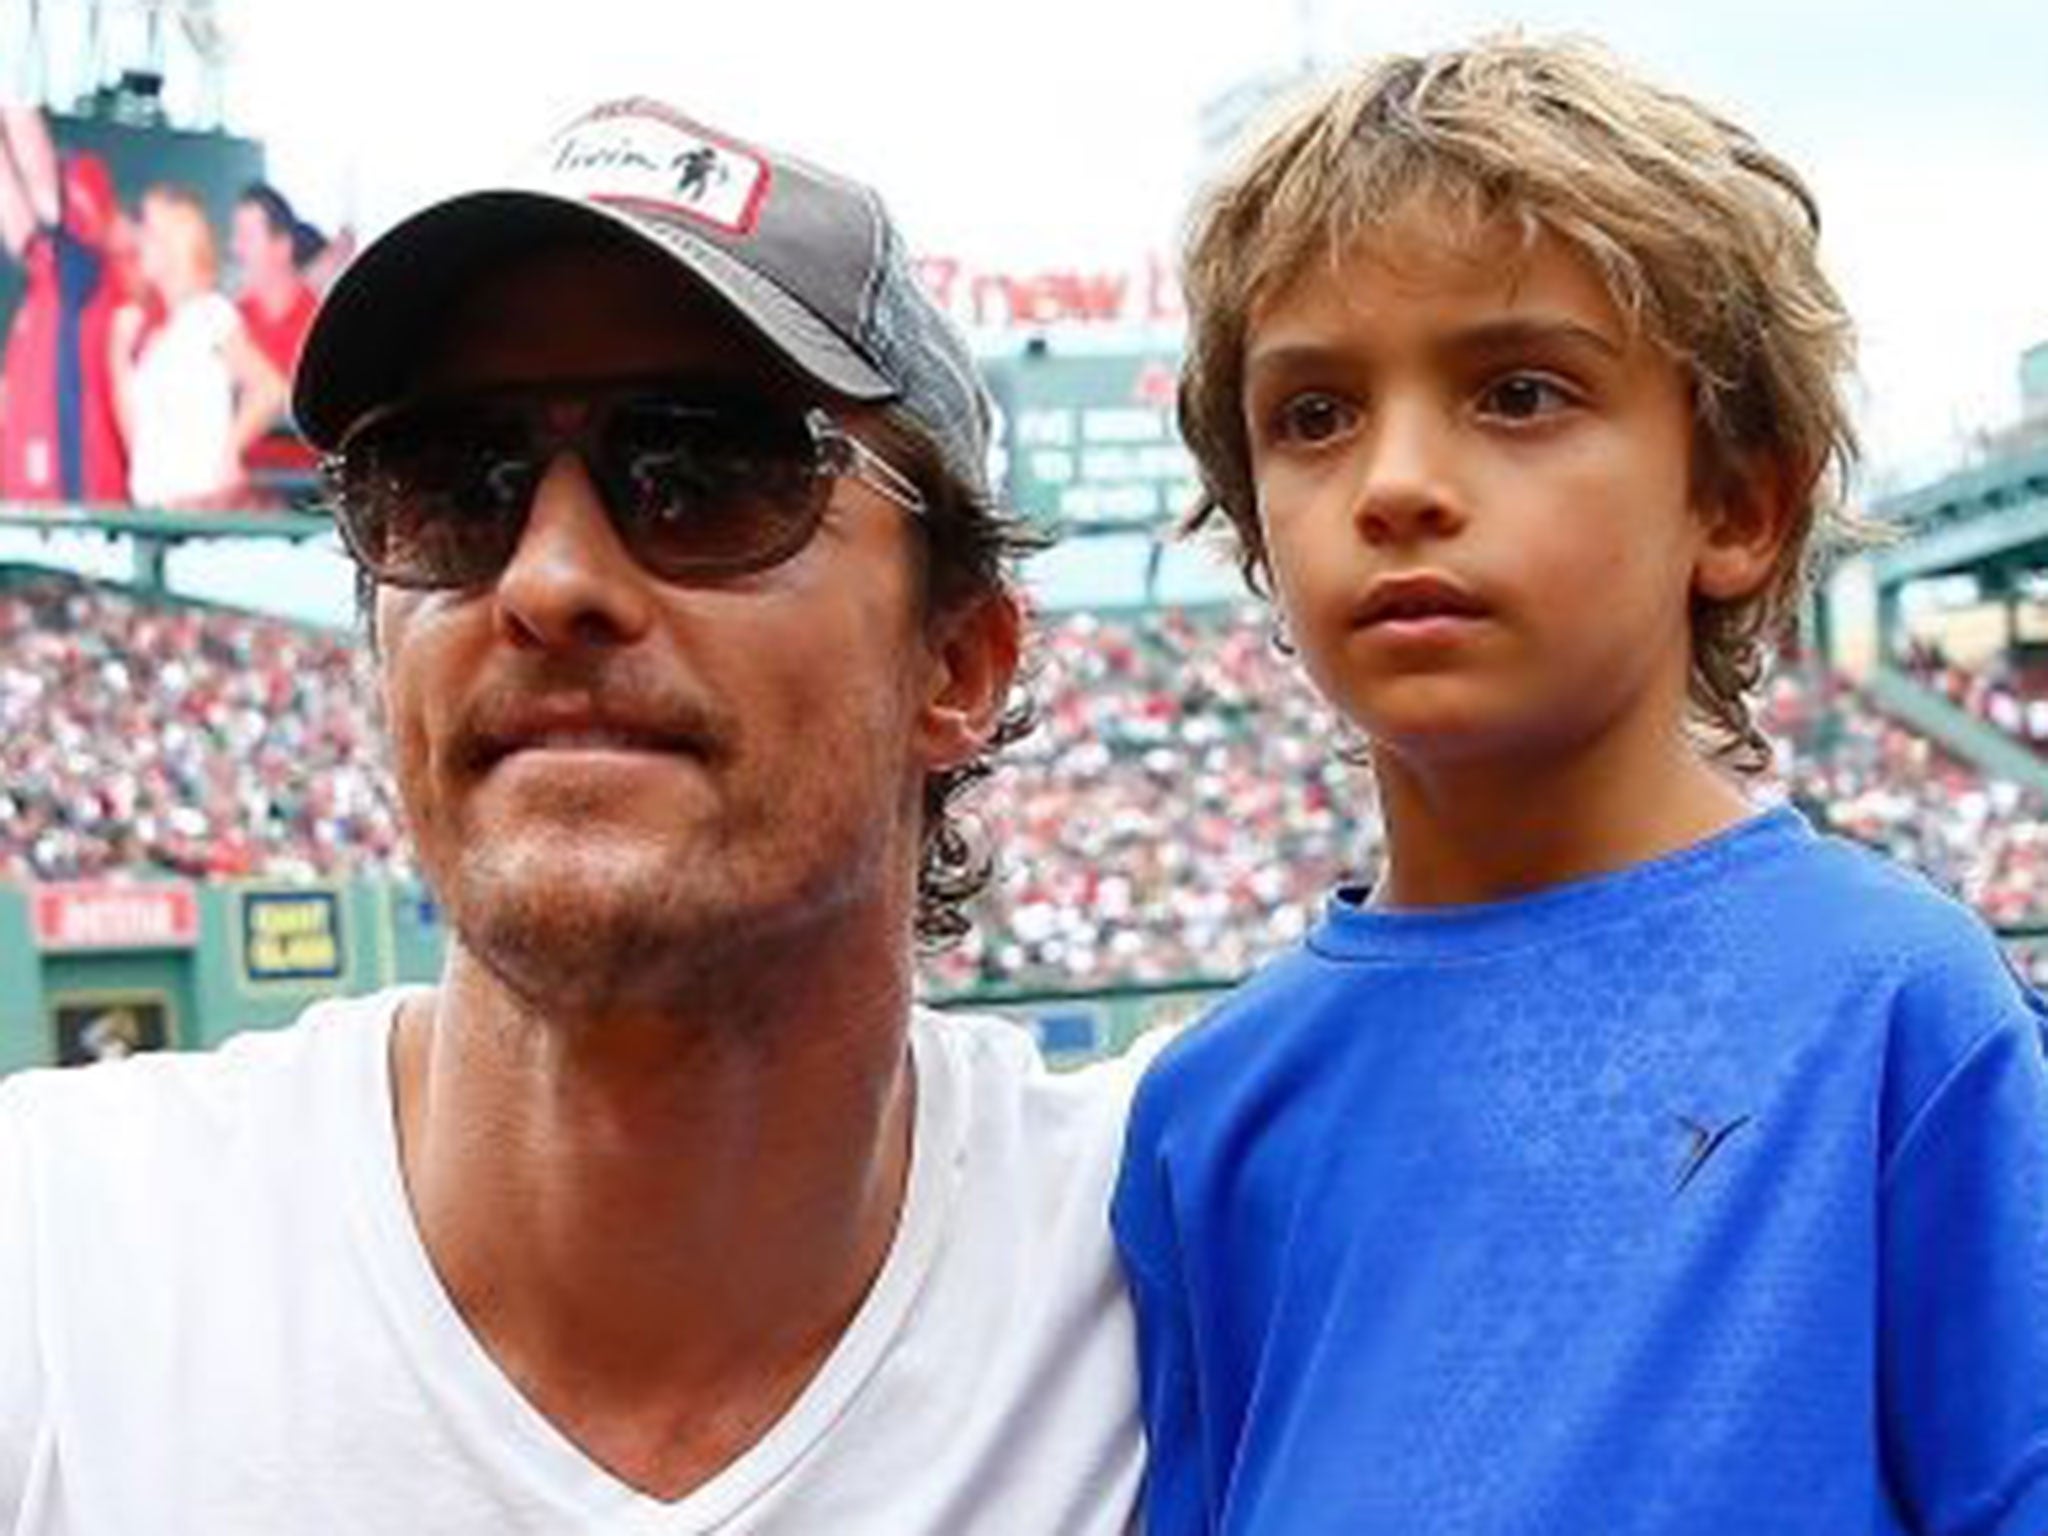 Matthew McConaughey and his son Levi at the game between the Boston Red Sox and the Houston Astros at Fenway Park on August 17, 2014 in Boston, Massachusetts.